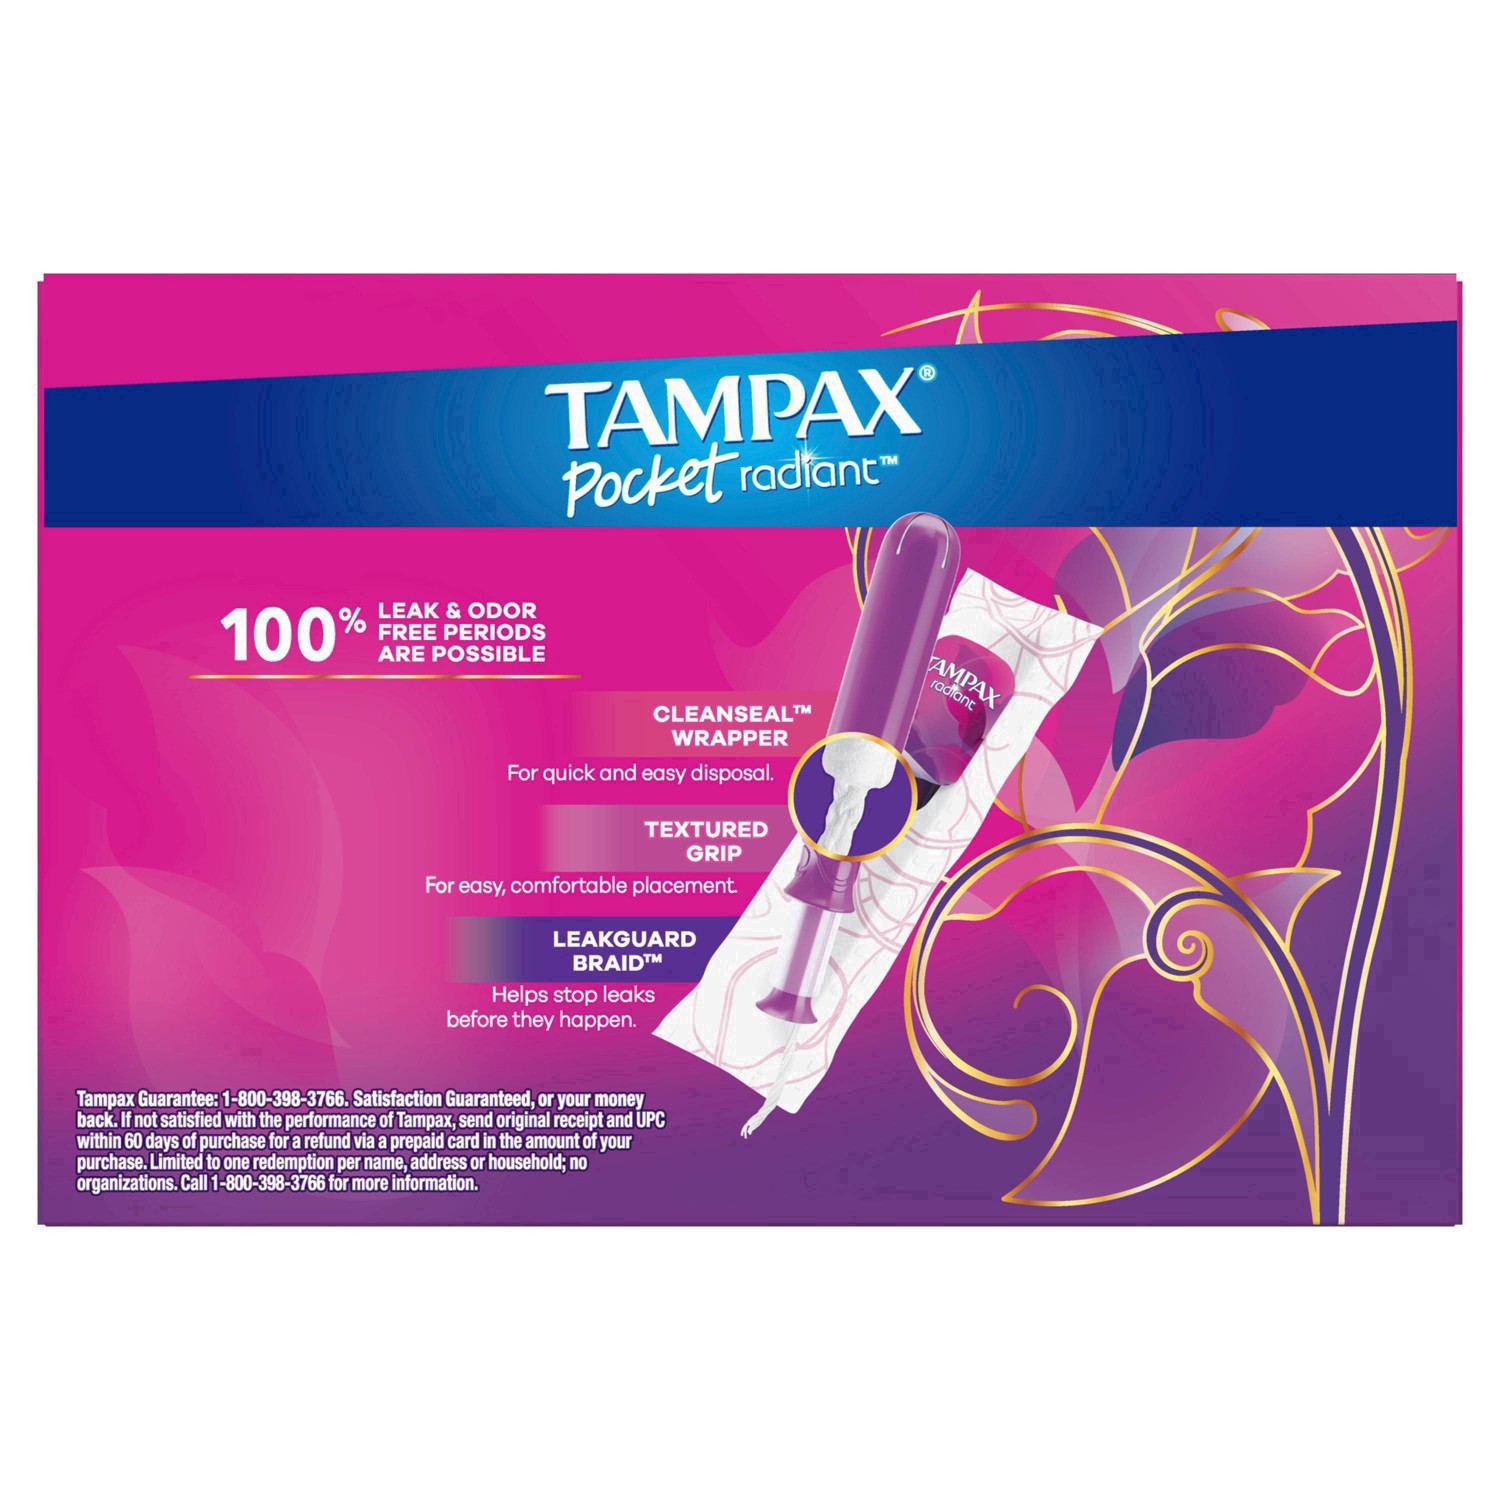 slide 51 of 94, Tampax Pocket Radiant Compact Plastic Tampons, With LeakGuard Braid, Super Absorbency, Unscented, 28 Count, 28 ct